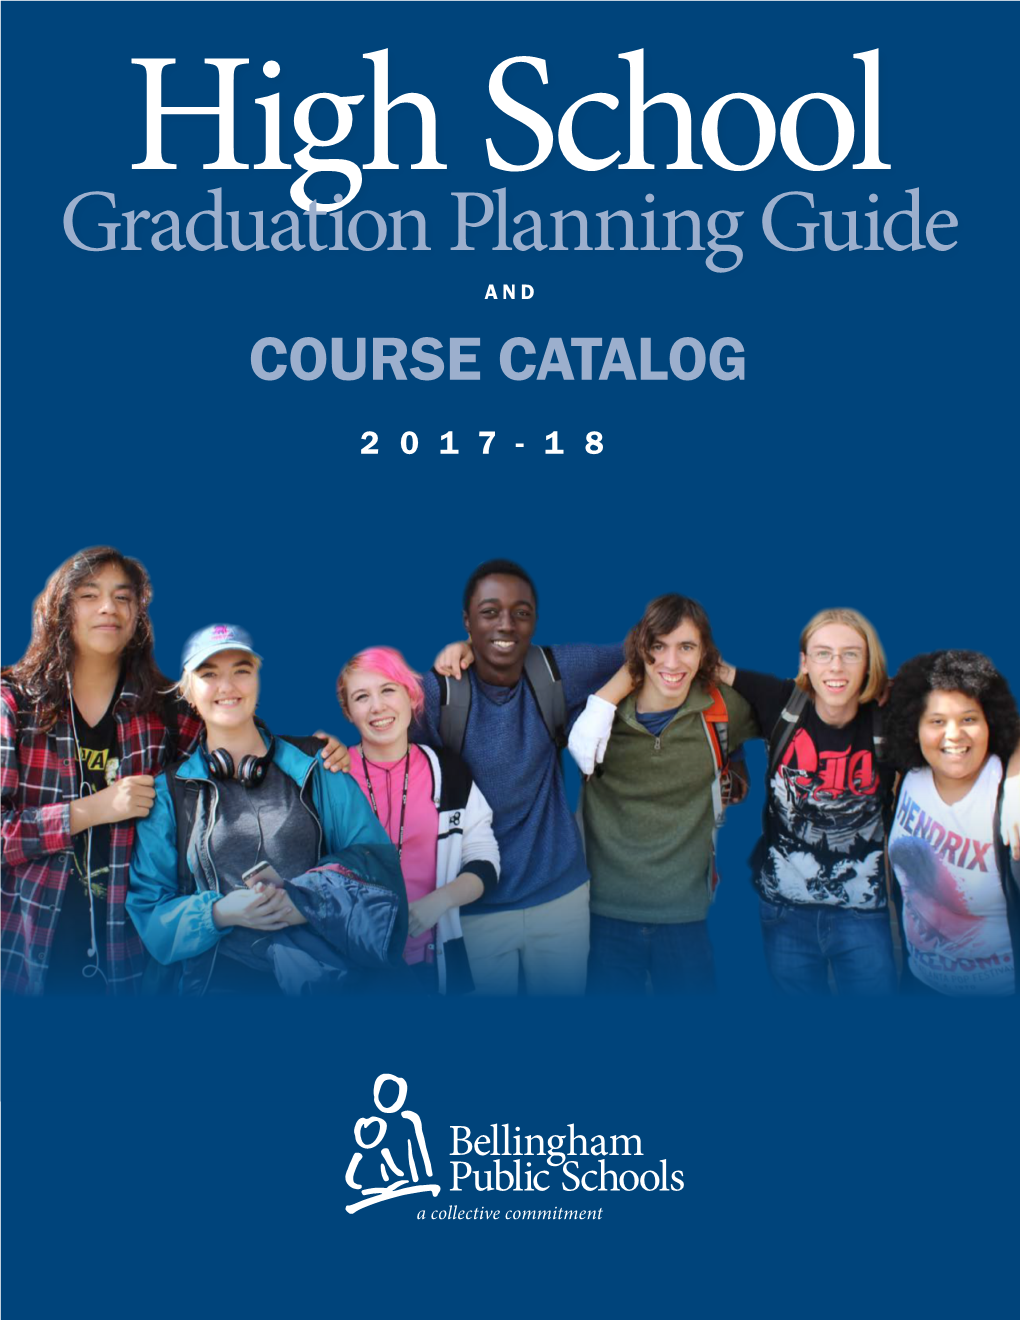 Graduation Planning Guide and COURSE CATALOG 2017-18